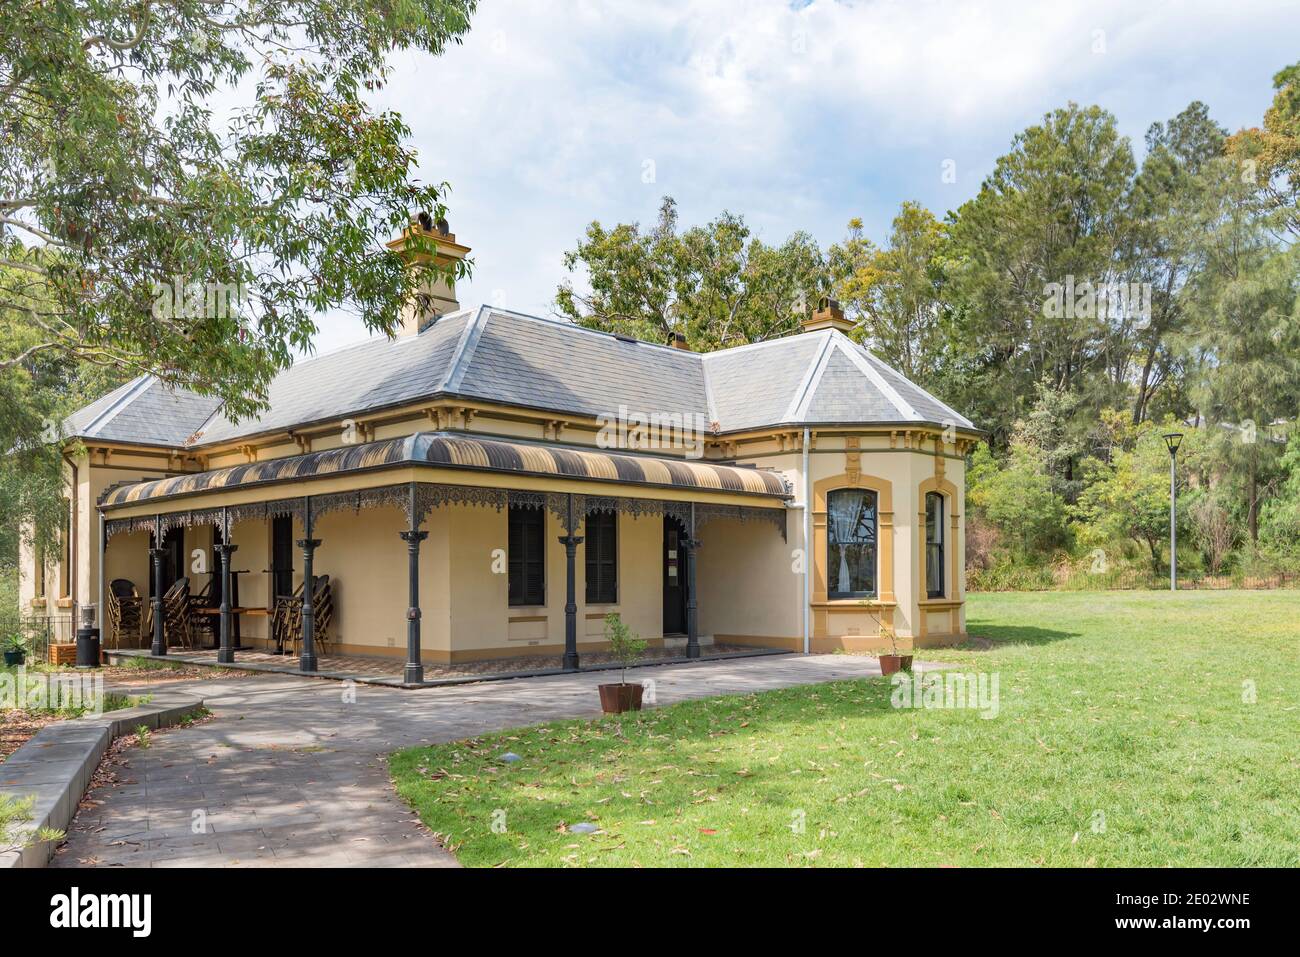 Bellevue Cottage is a mid to late Victorian villa with Italianate features located in what is now Blackwattle Park beside Sydney Harbour, Australia Stock Photo